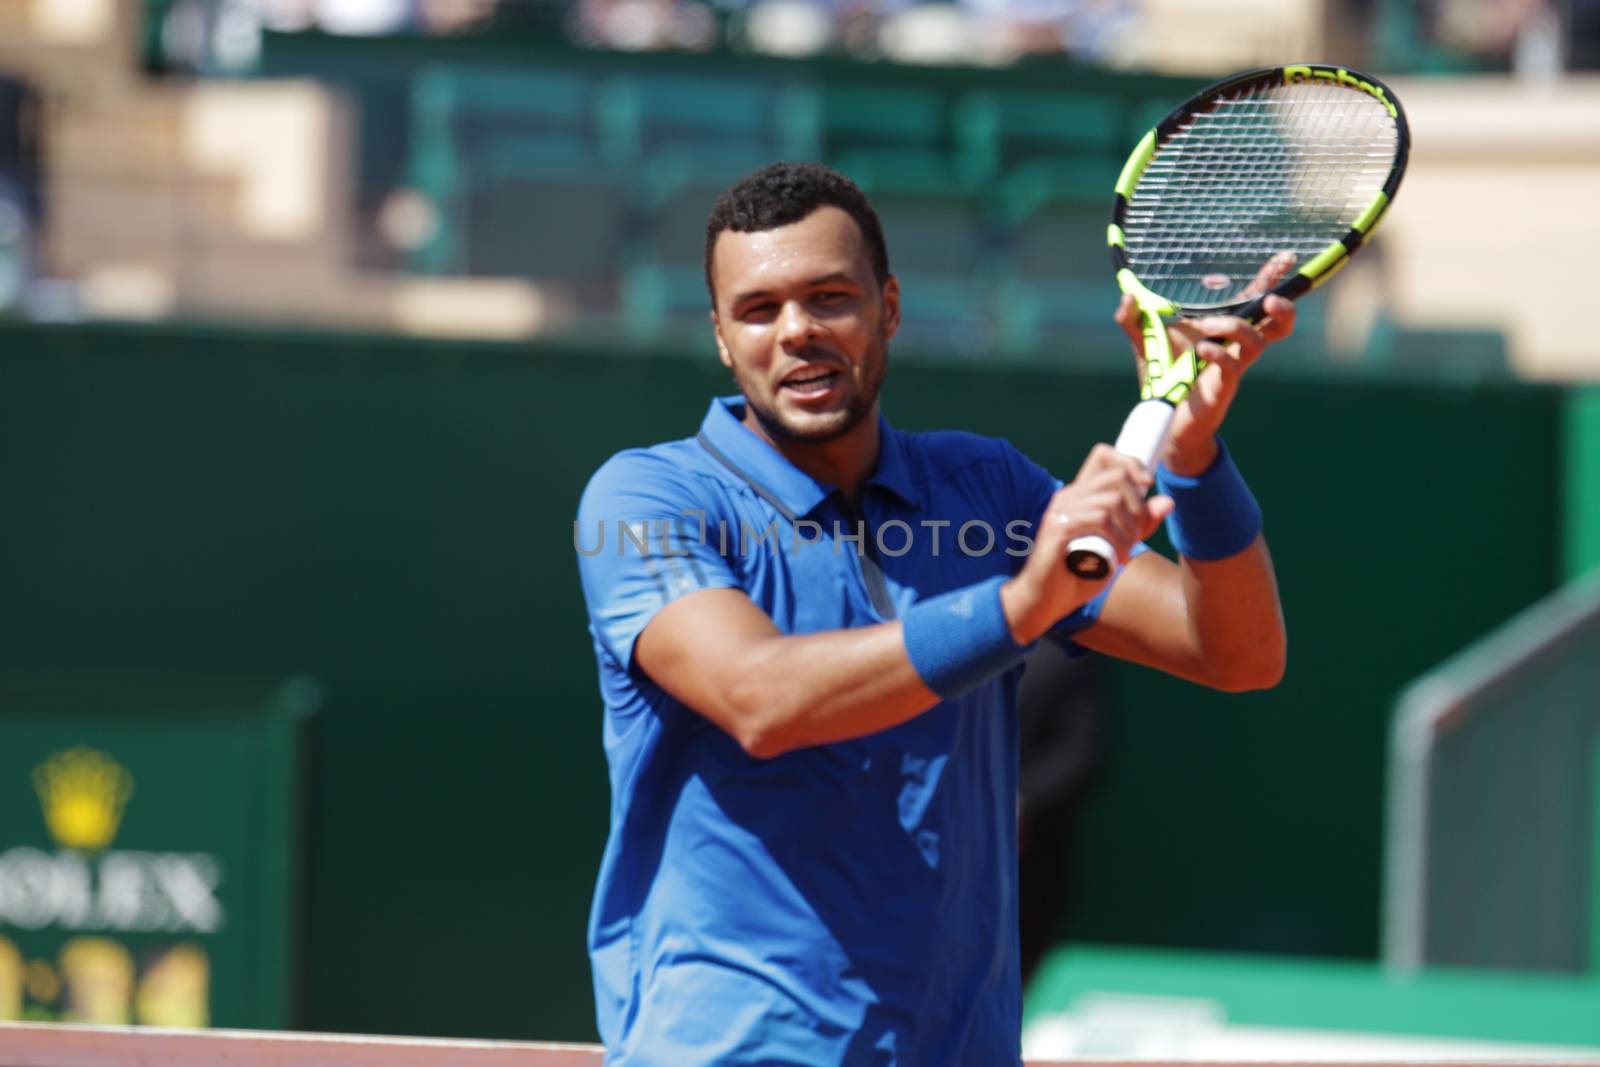 MONACA, Monte-Carlo: France's Jo-Wilfried Tsonga is pictured during their tennis match against Roger Federer at the Monte-Carlo ATP Masters Series tournament on April 15, 2016 in Monaco. France's Jo-Wilfried Tsonga is through to the Monte Carlo Masters semi-finals following a win over Switzerland's Roger Federer.